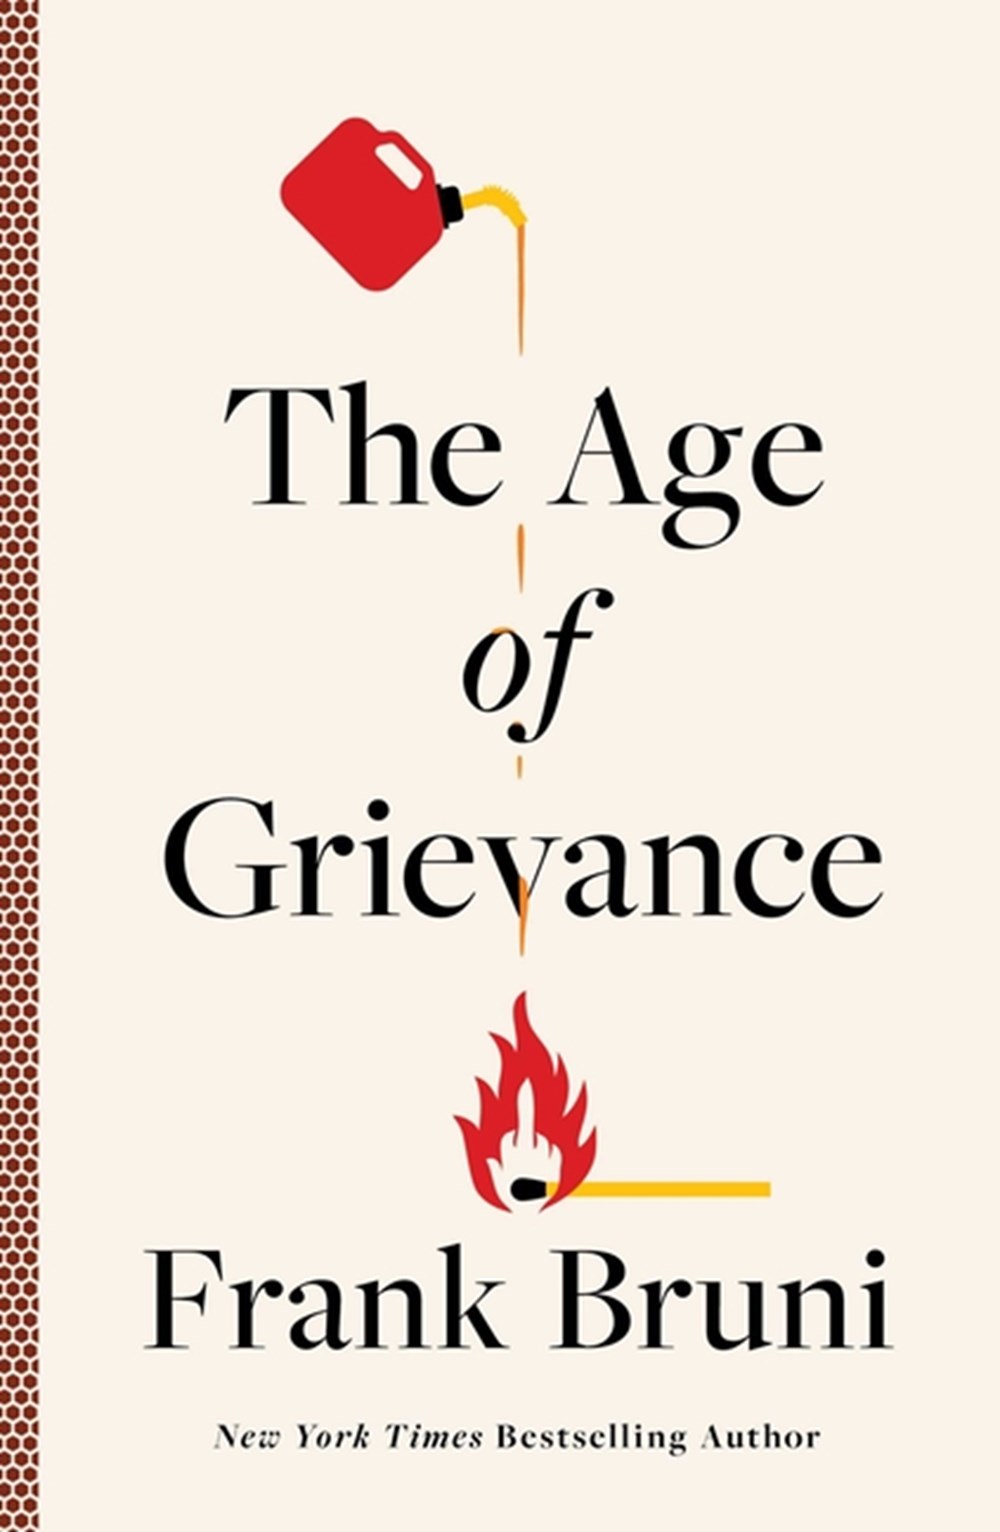 Age of Grievance